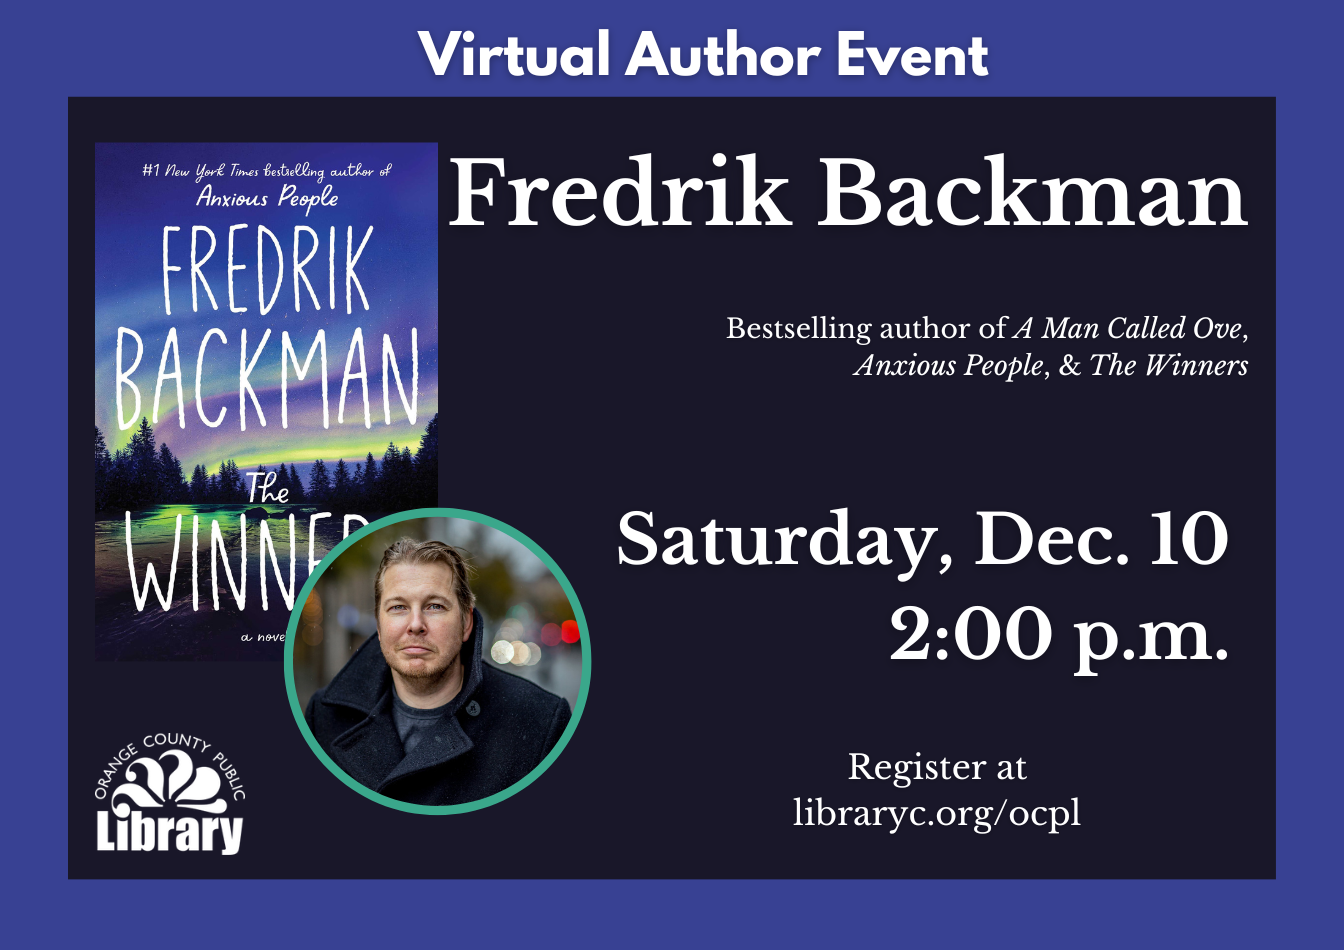 Virtual Author Event with Fredrik Backman